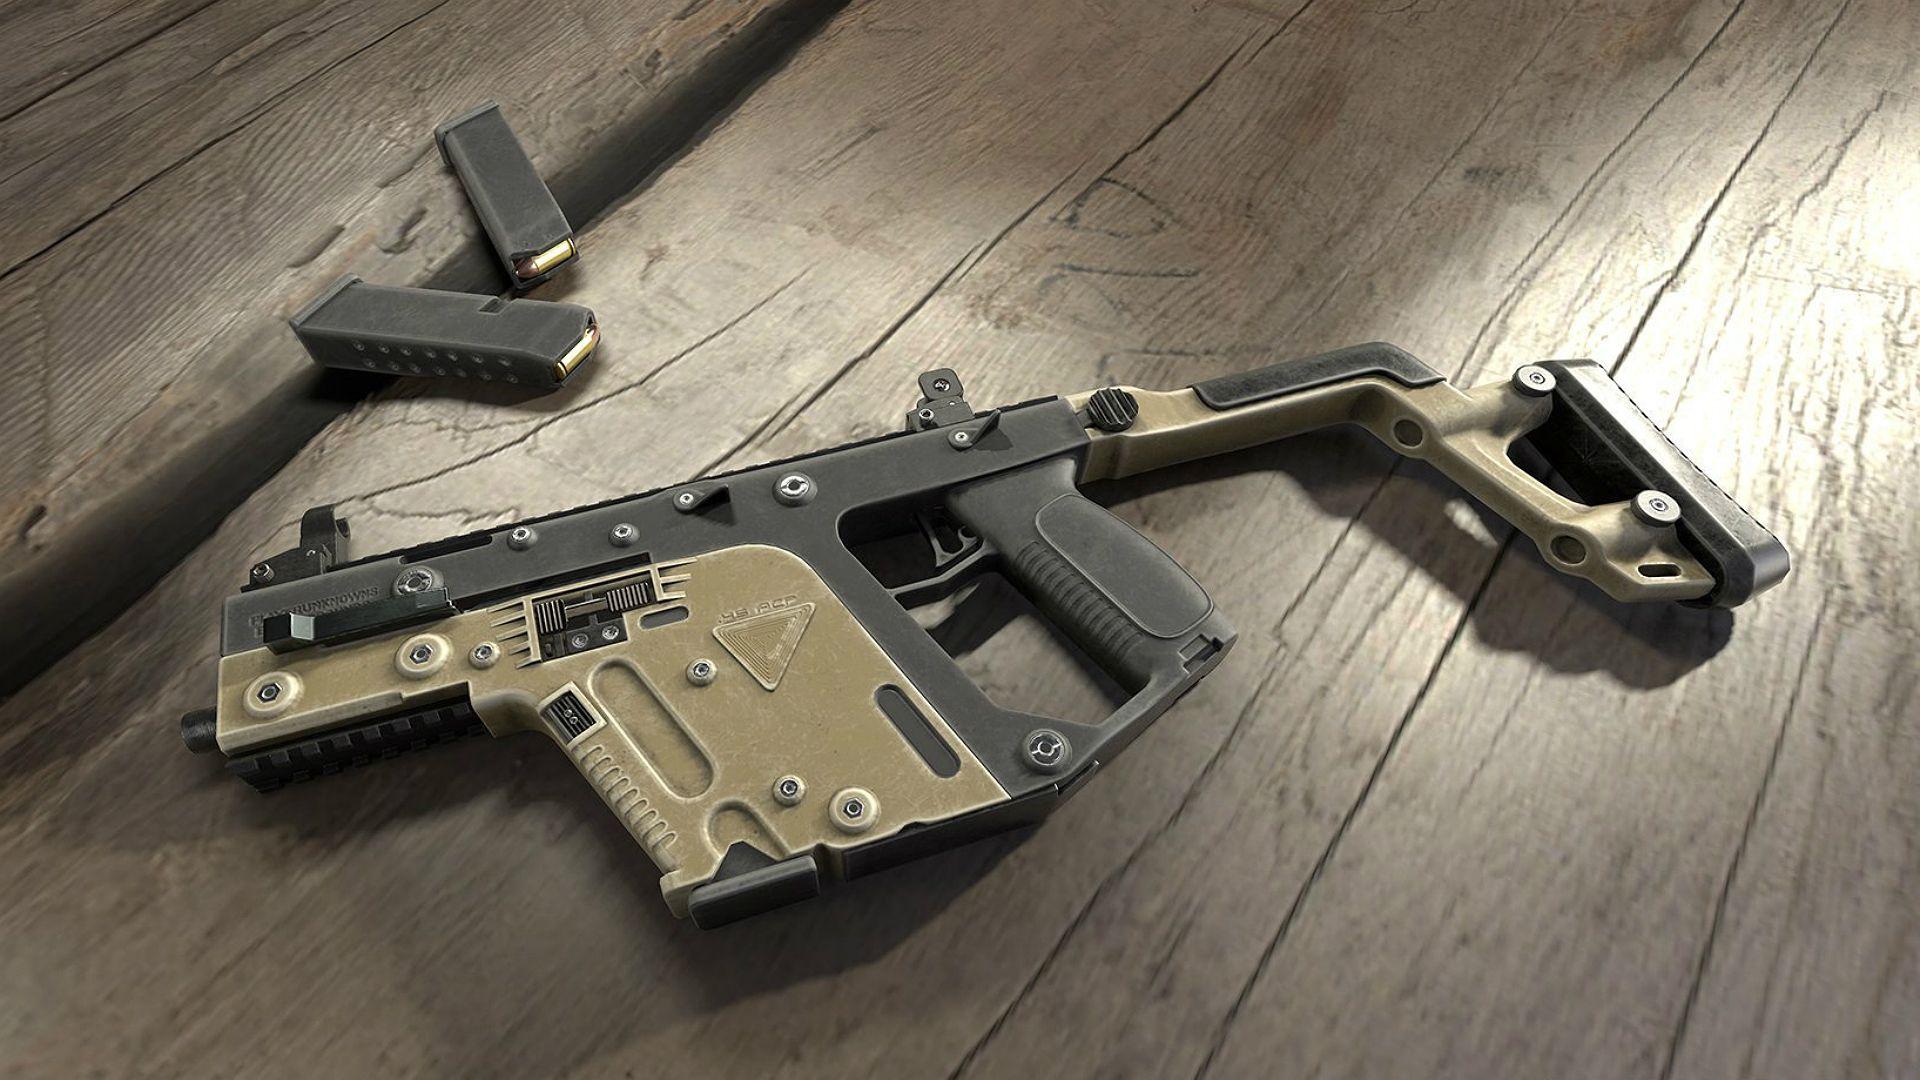 PUBG weapons guide: the best guns for getting a chicken dinner